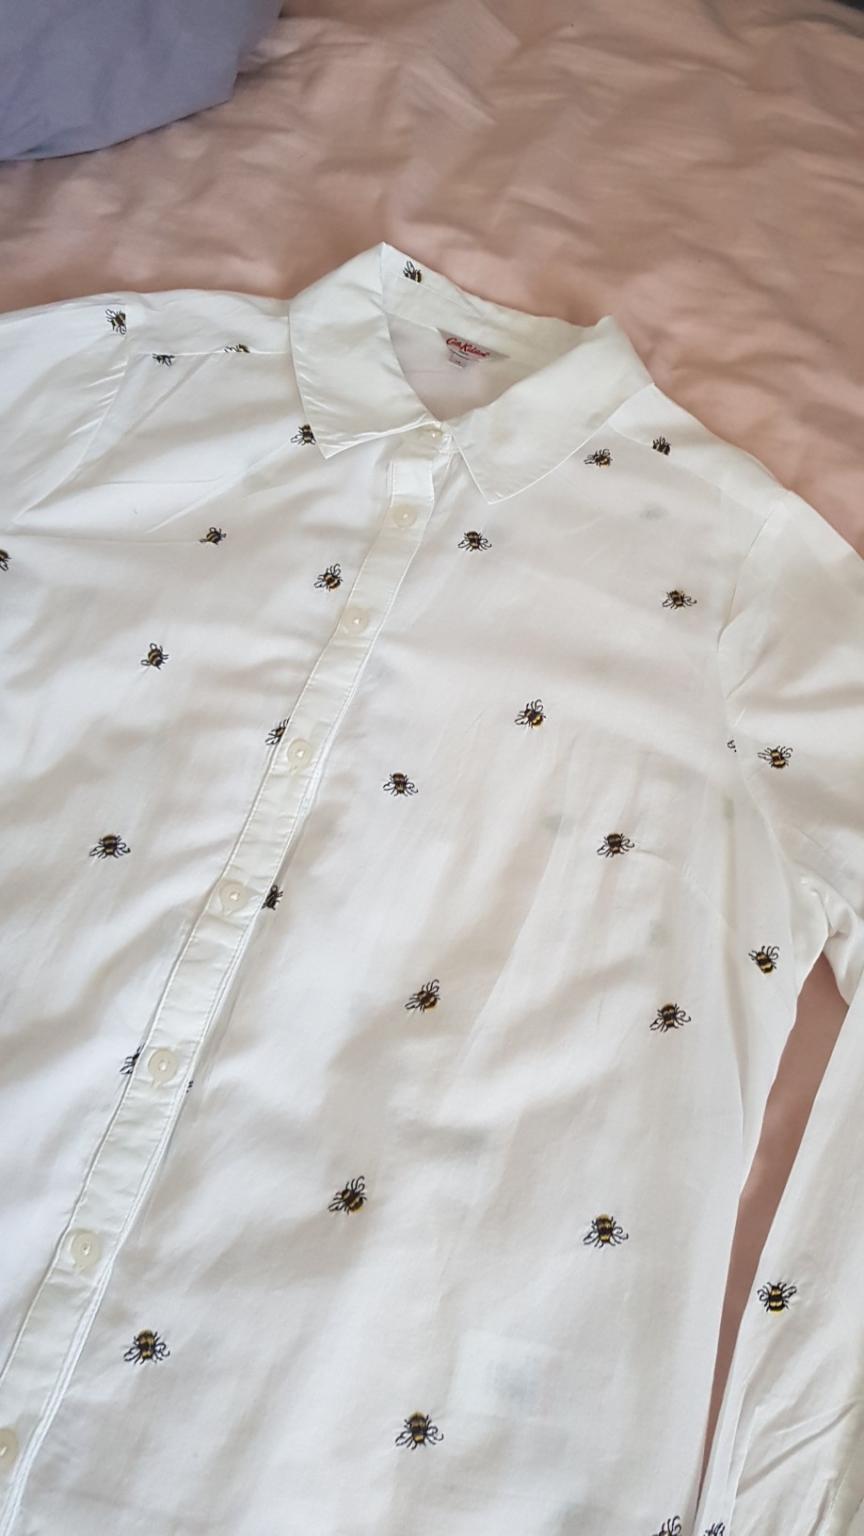 cath kidston bumble bee embroided shirt 